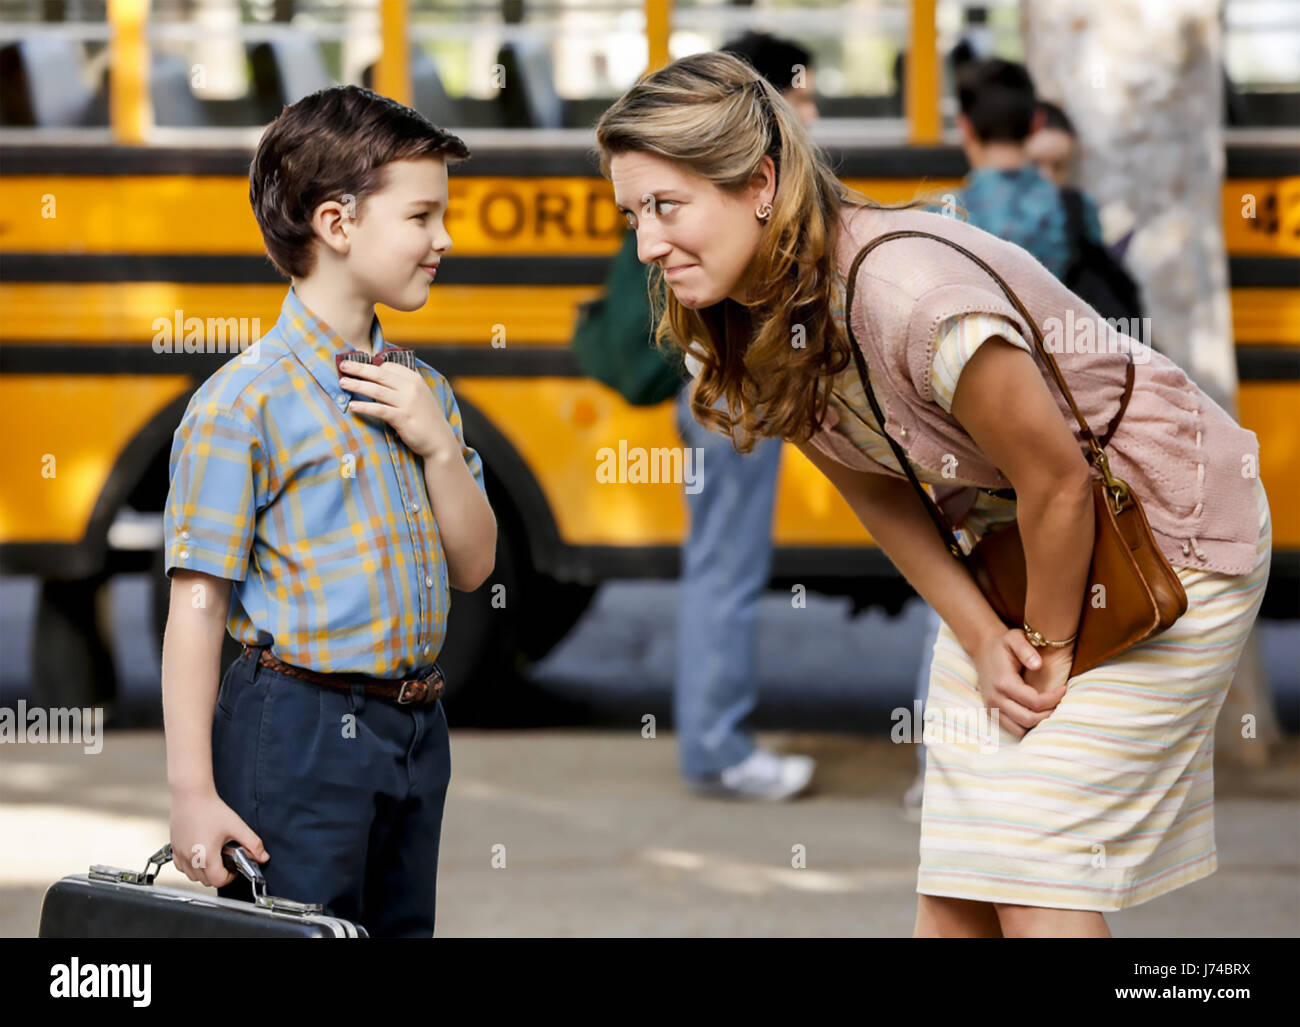 YOUNG SHELDON 2017 Warner bros TV series with Ian Armitage and Zoe Perry Stock Photo